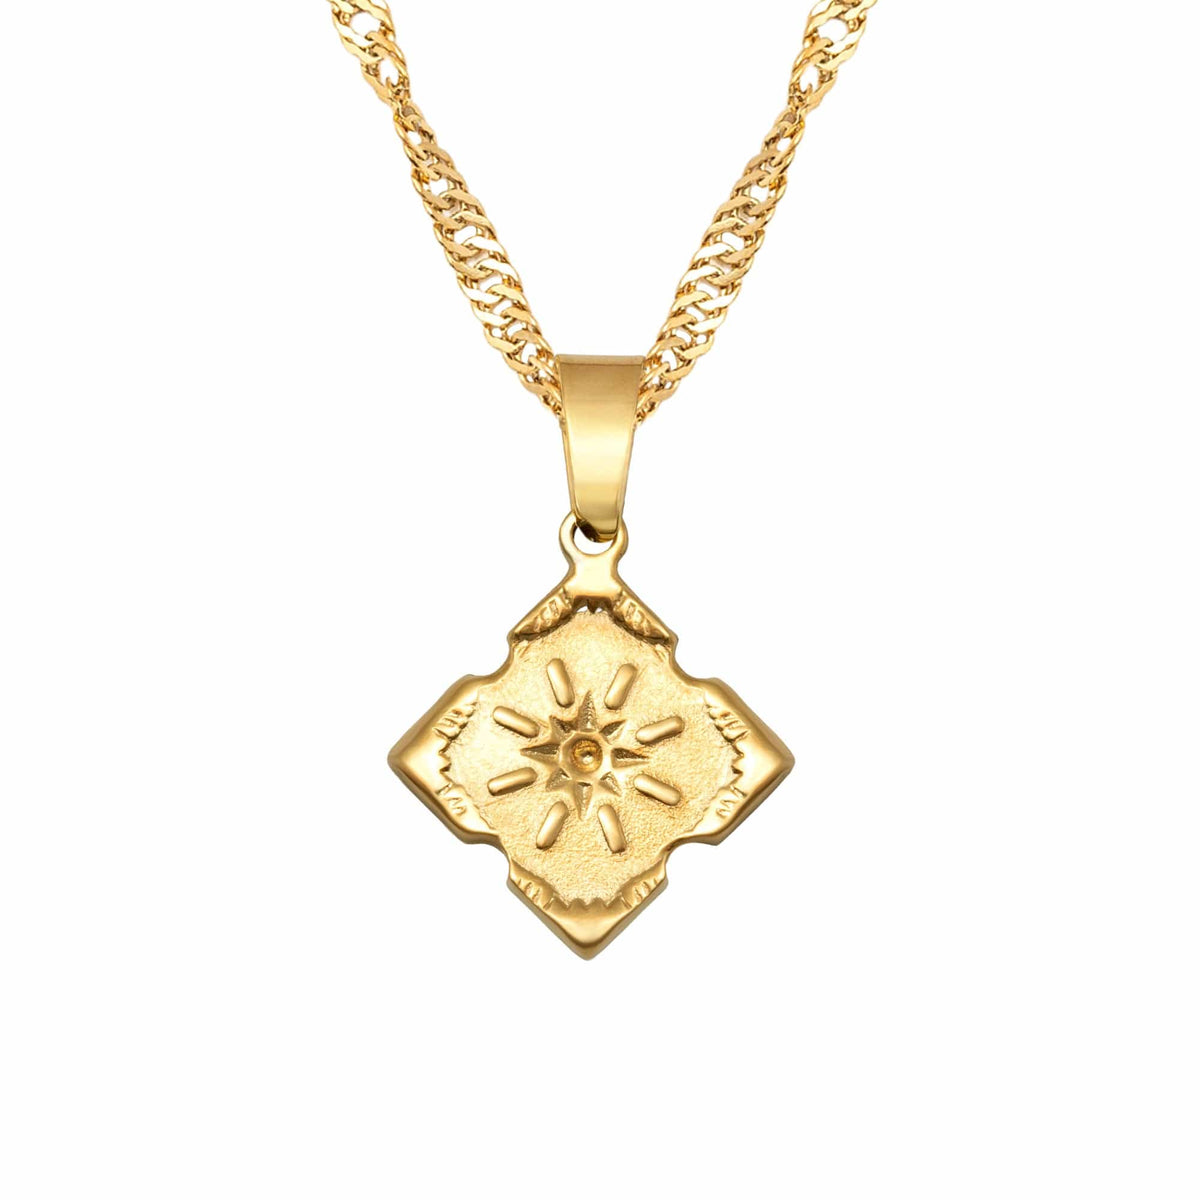 BohoMoon Stainless Steel Sunny Necklace Gold